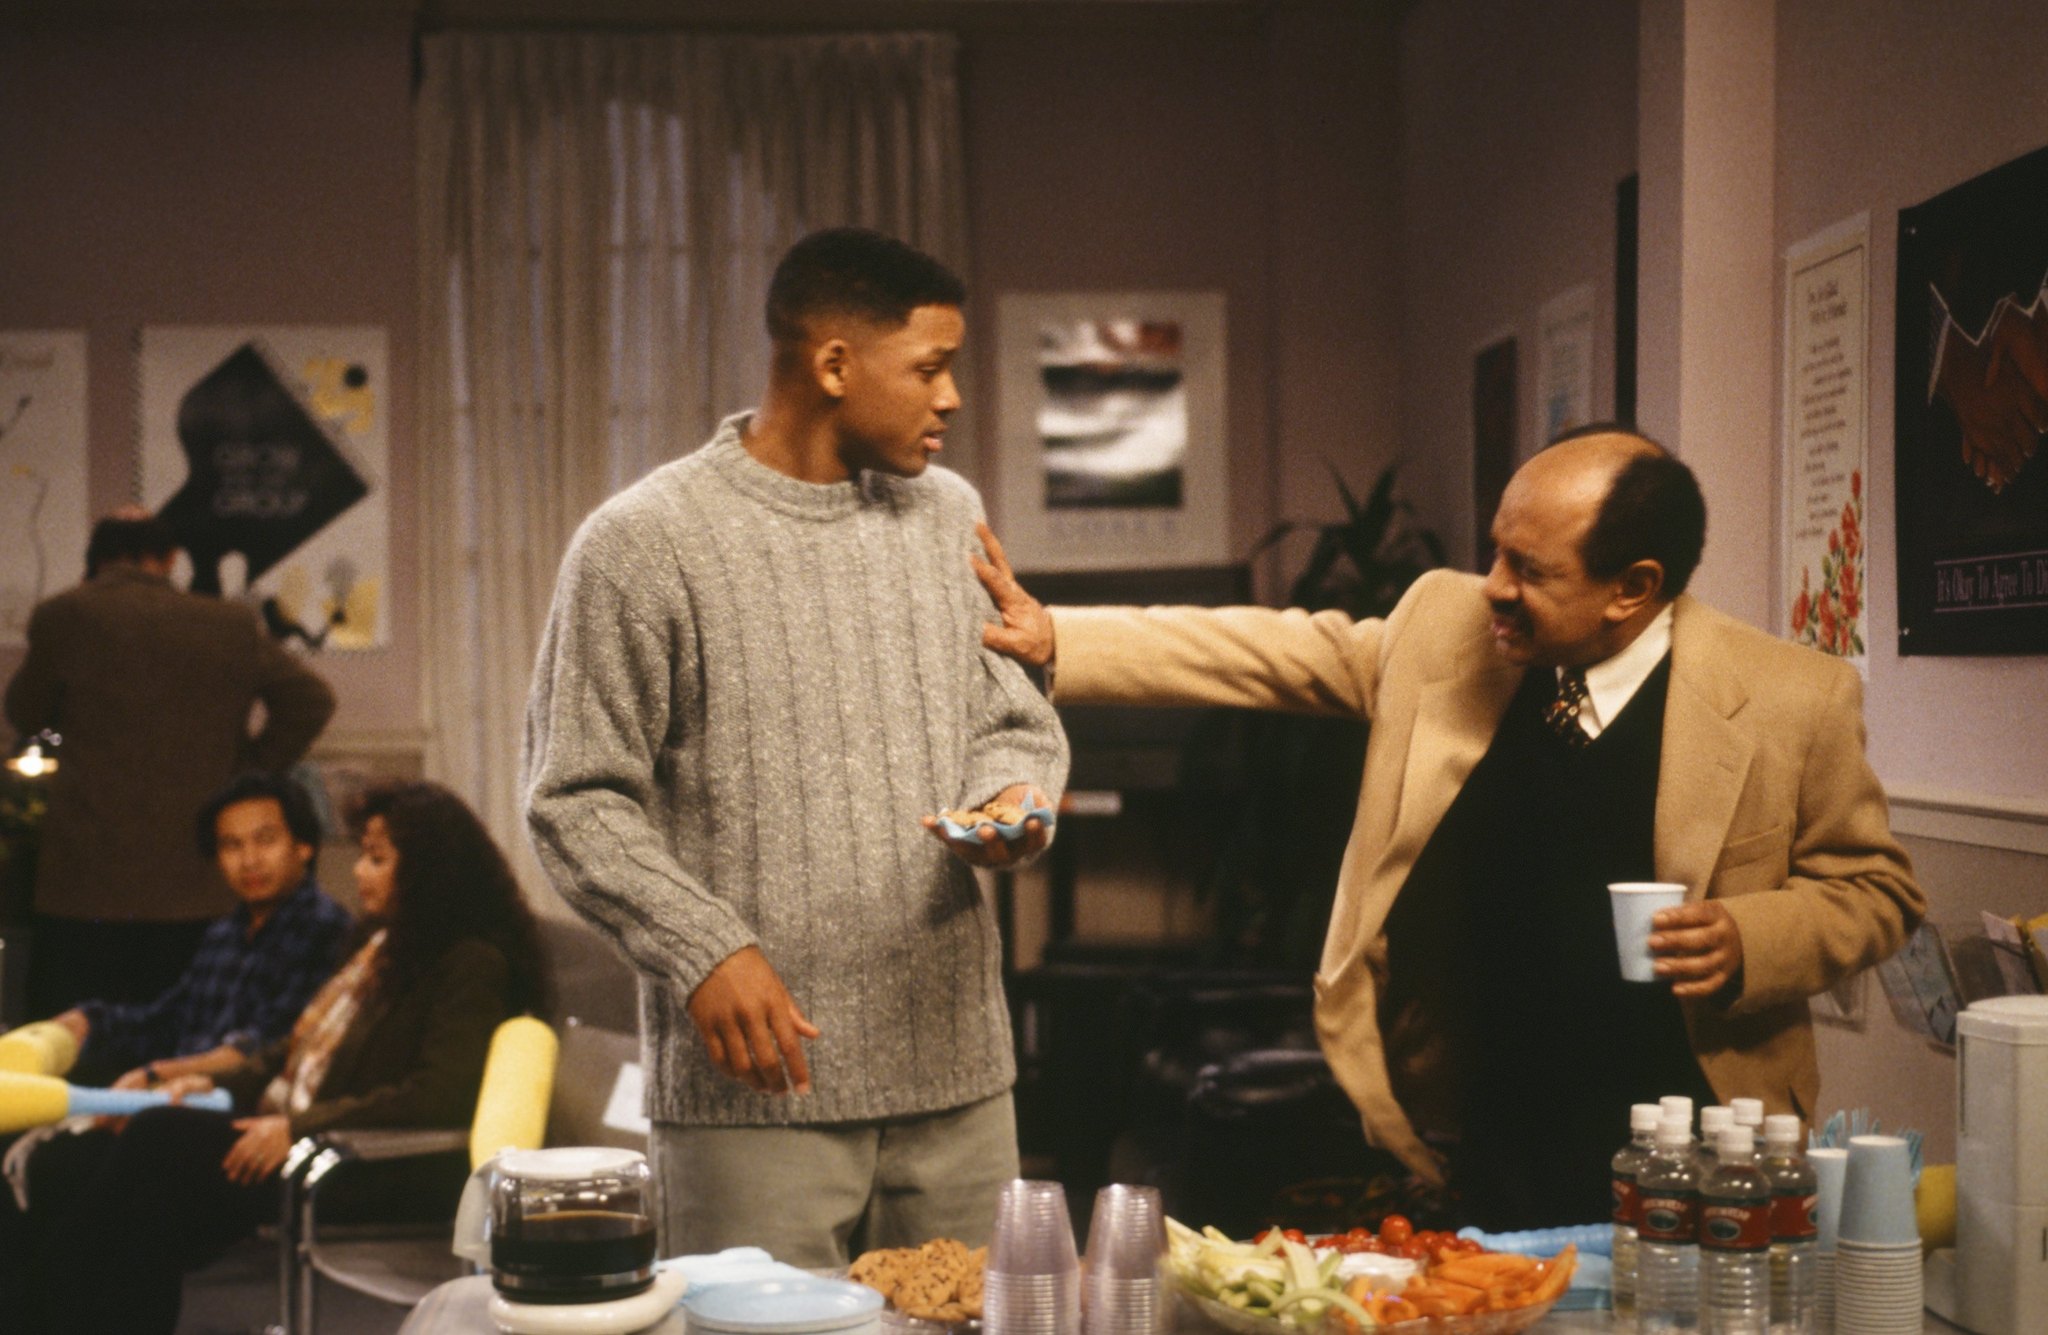 Will Smith and Sherman Hemsley at event of The Fresh Prince of Bel-Air (1990)